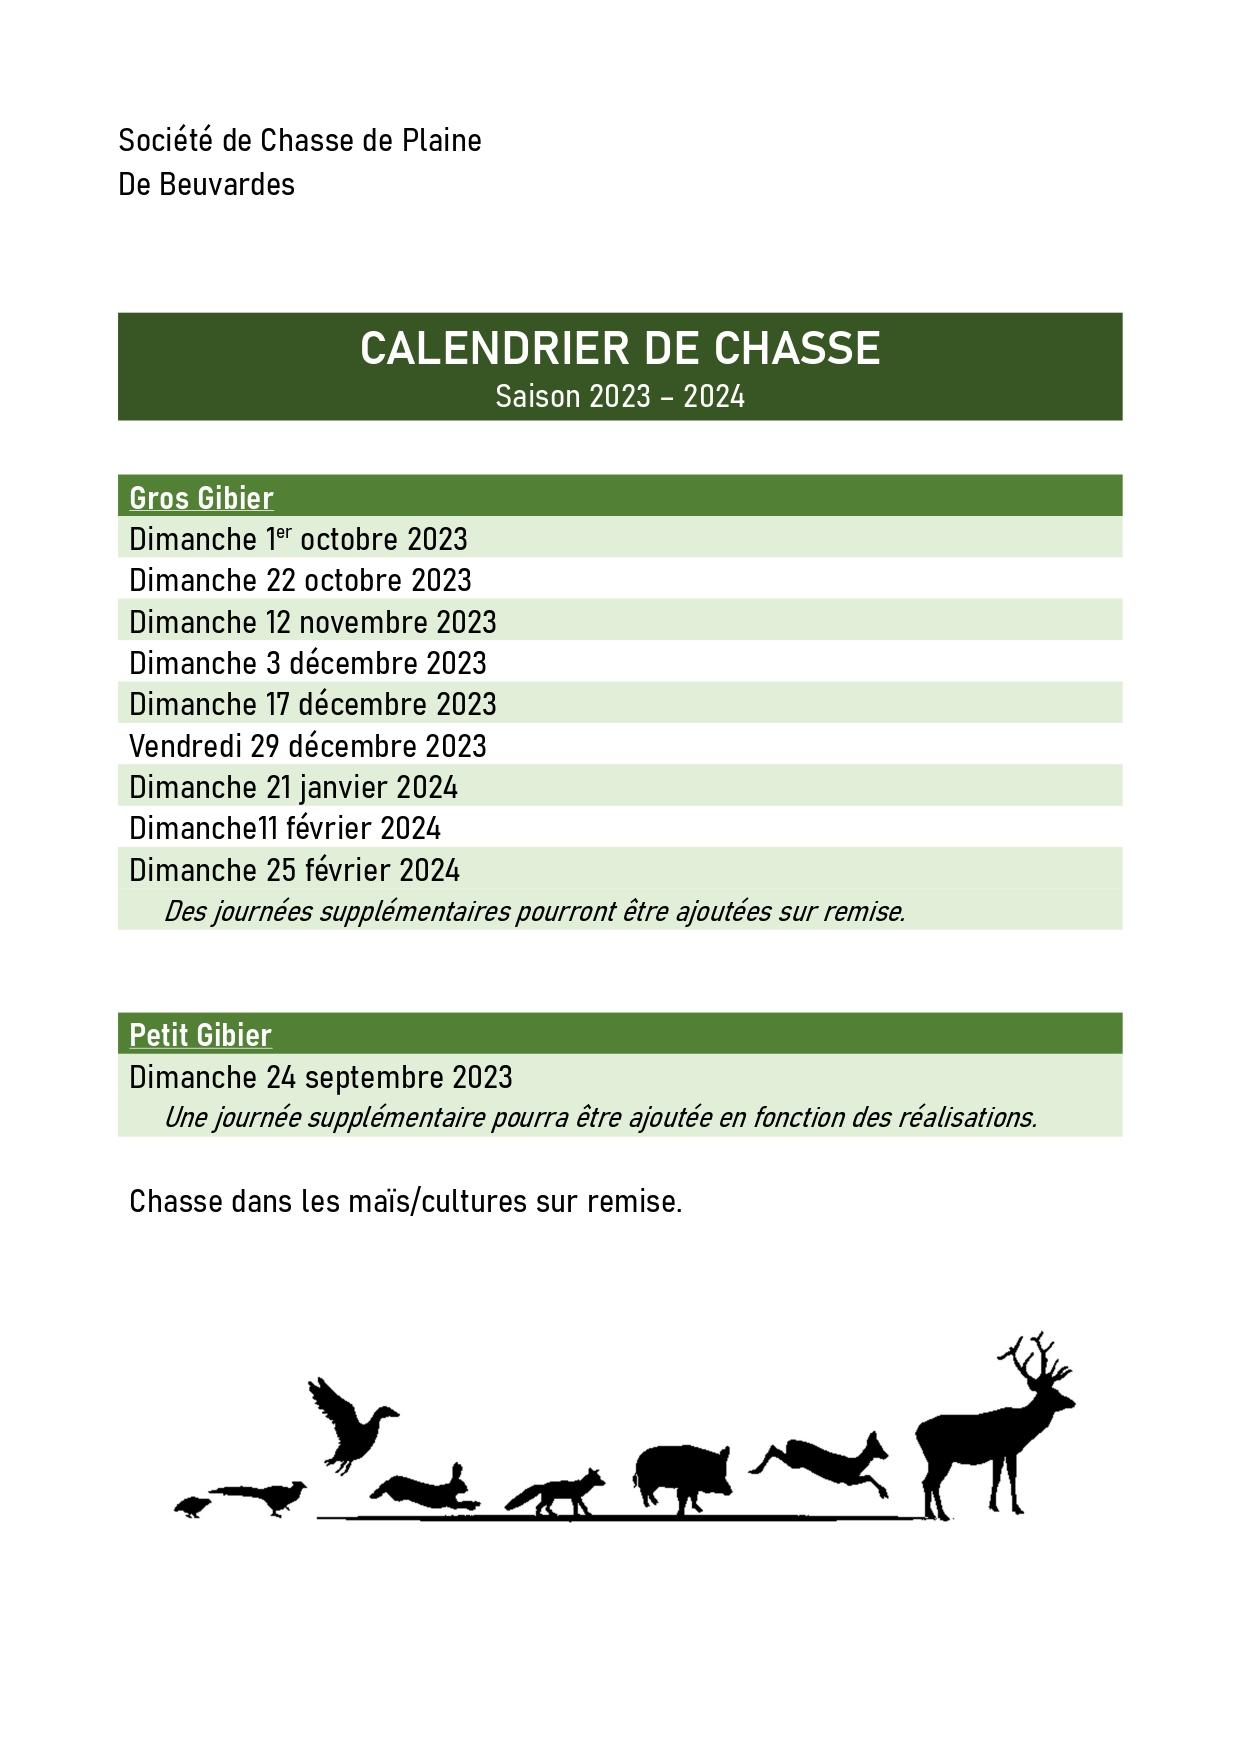 Calendrier chasse 2023 2024 page 0001